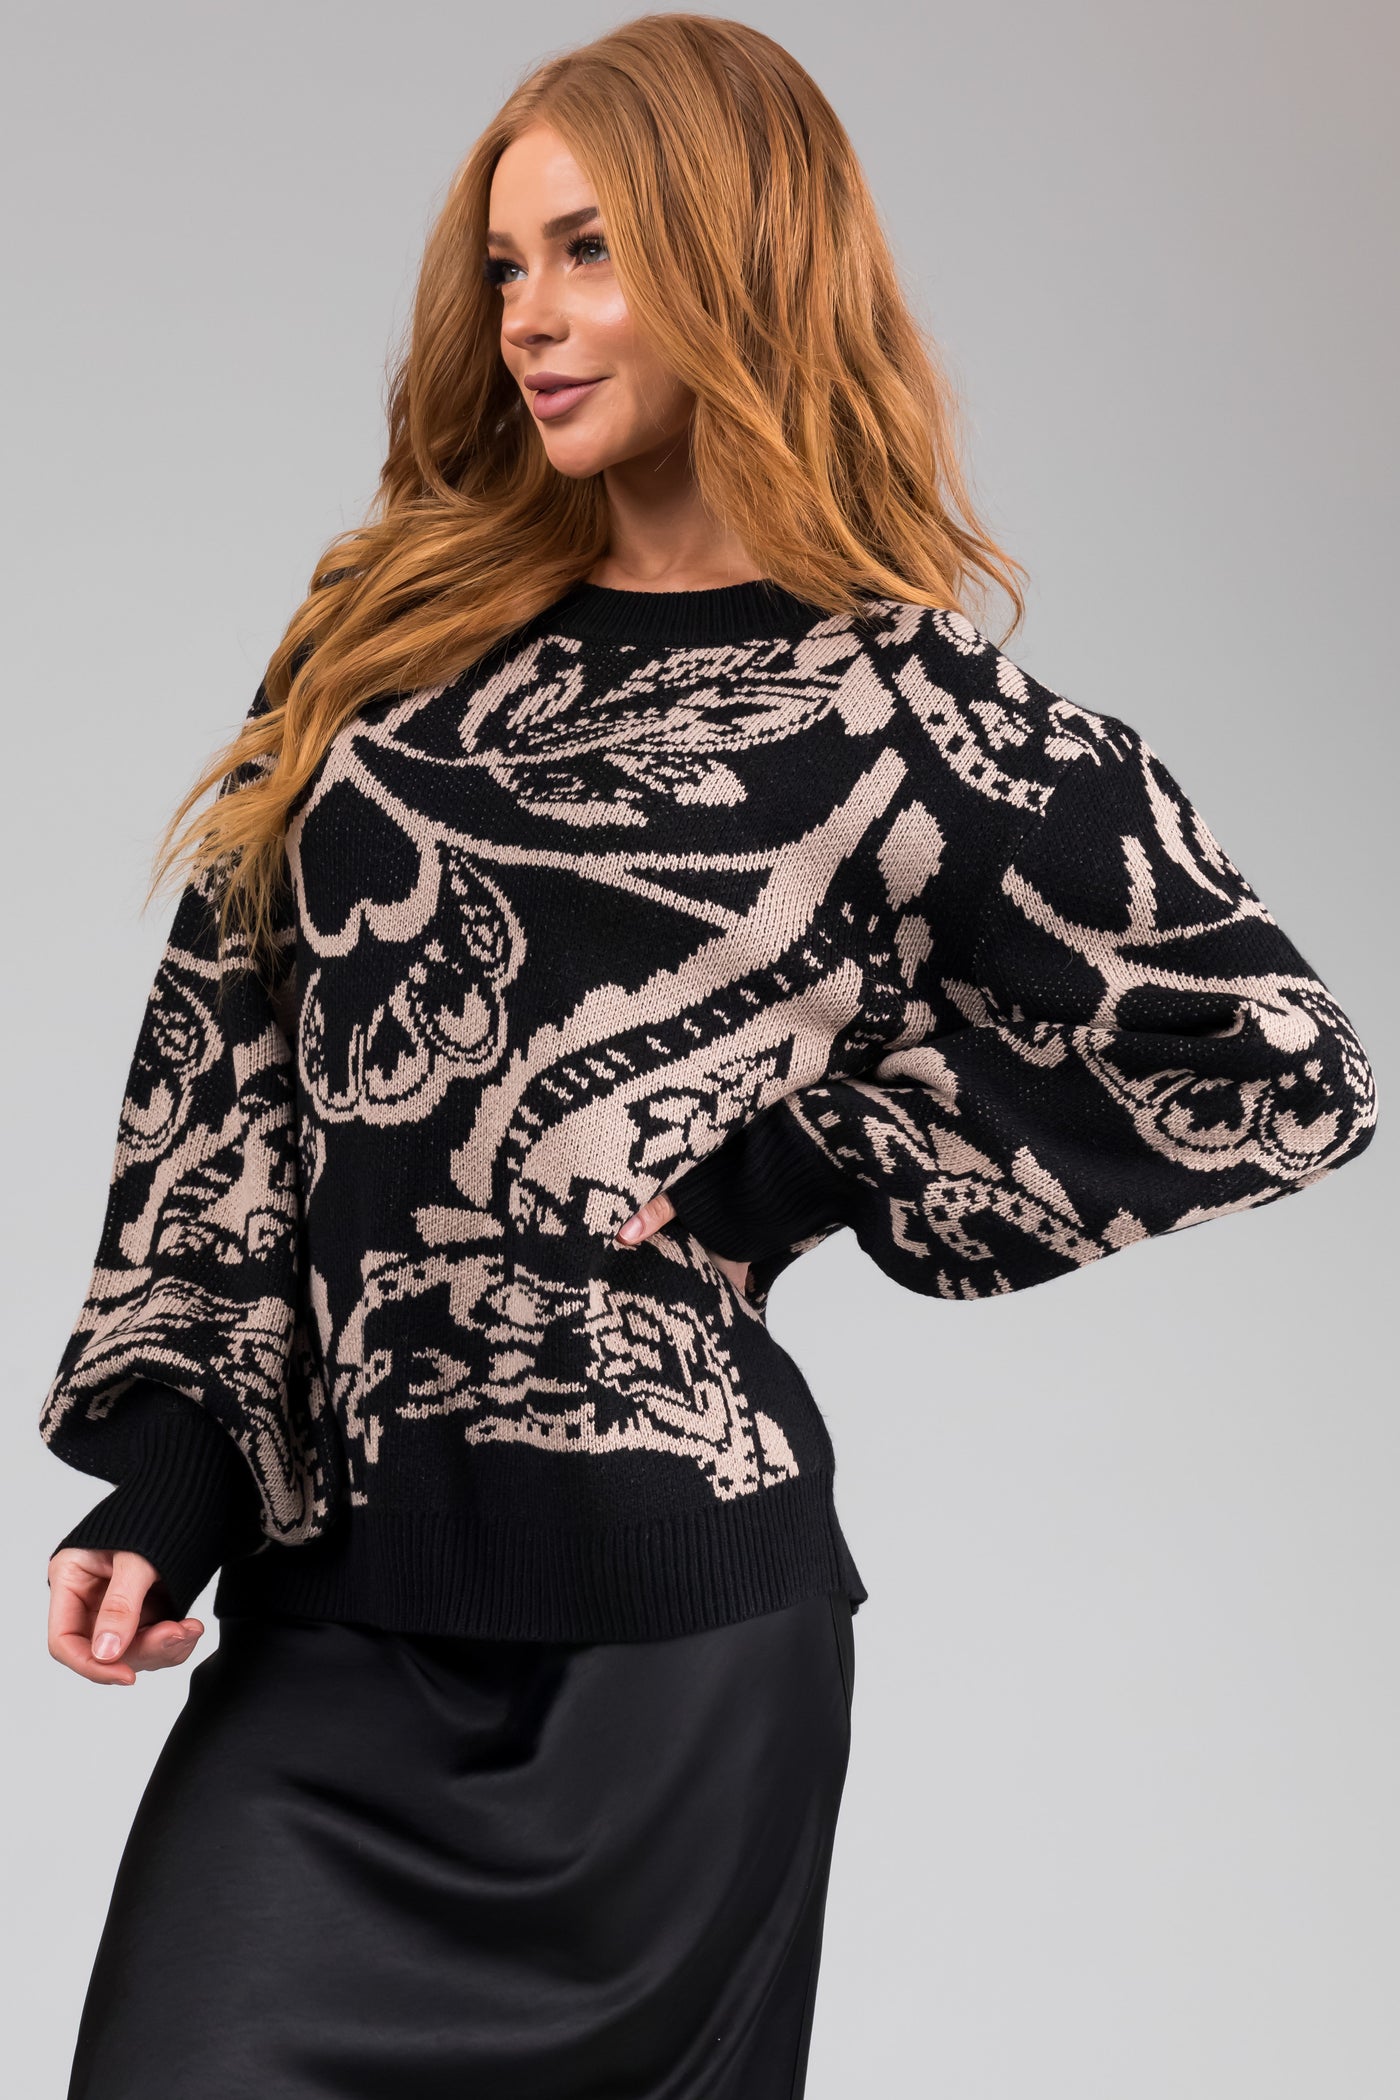 Black and Beige Abstract Print Knit Sweater